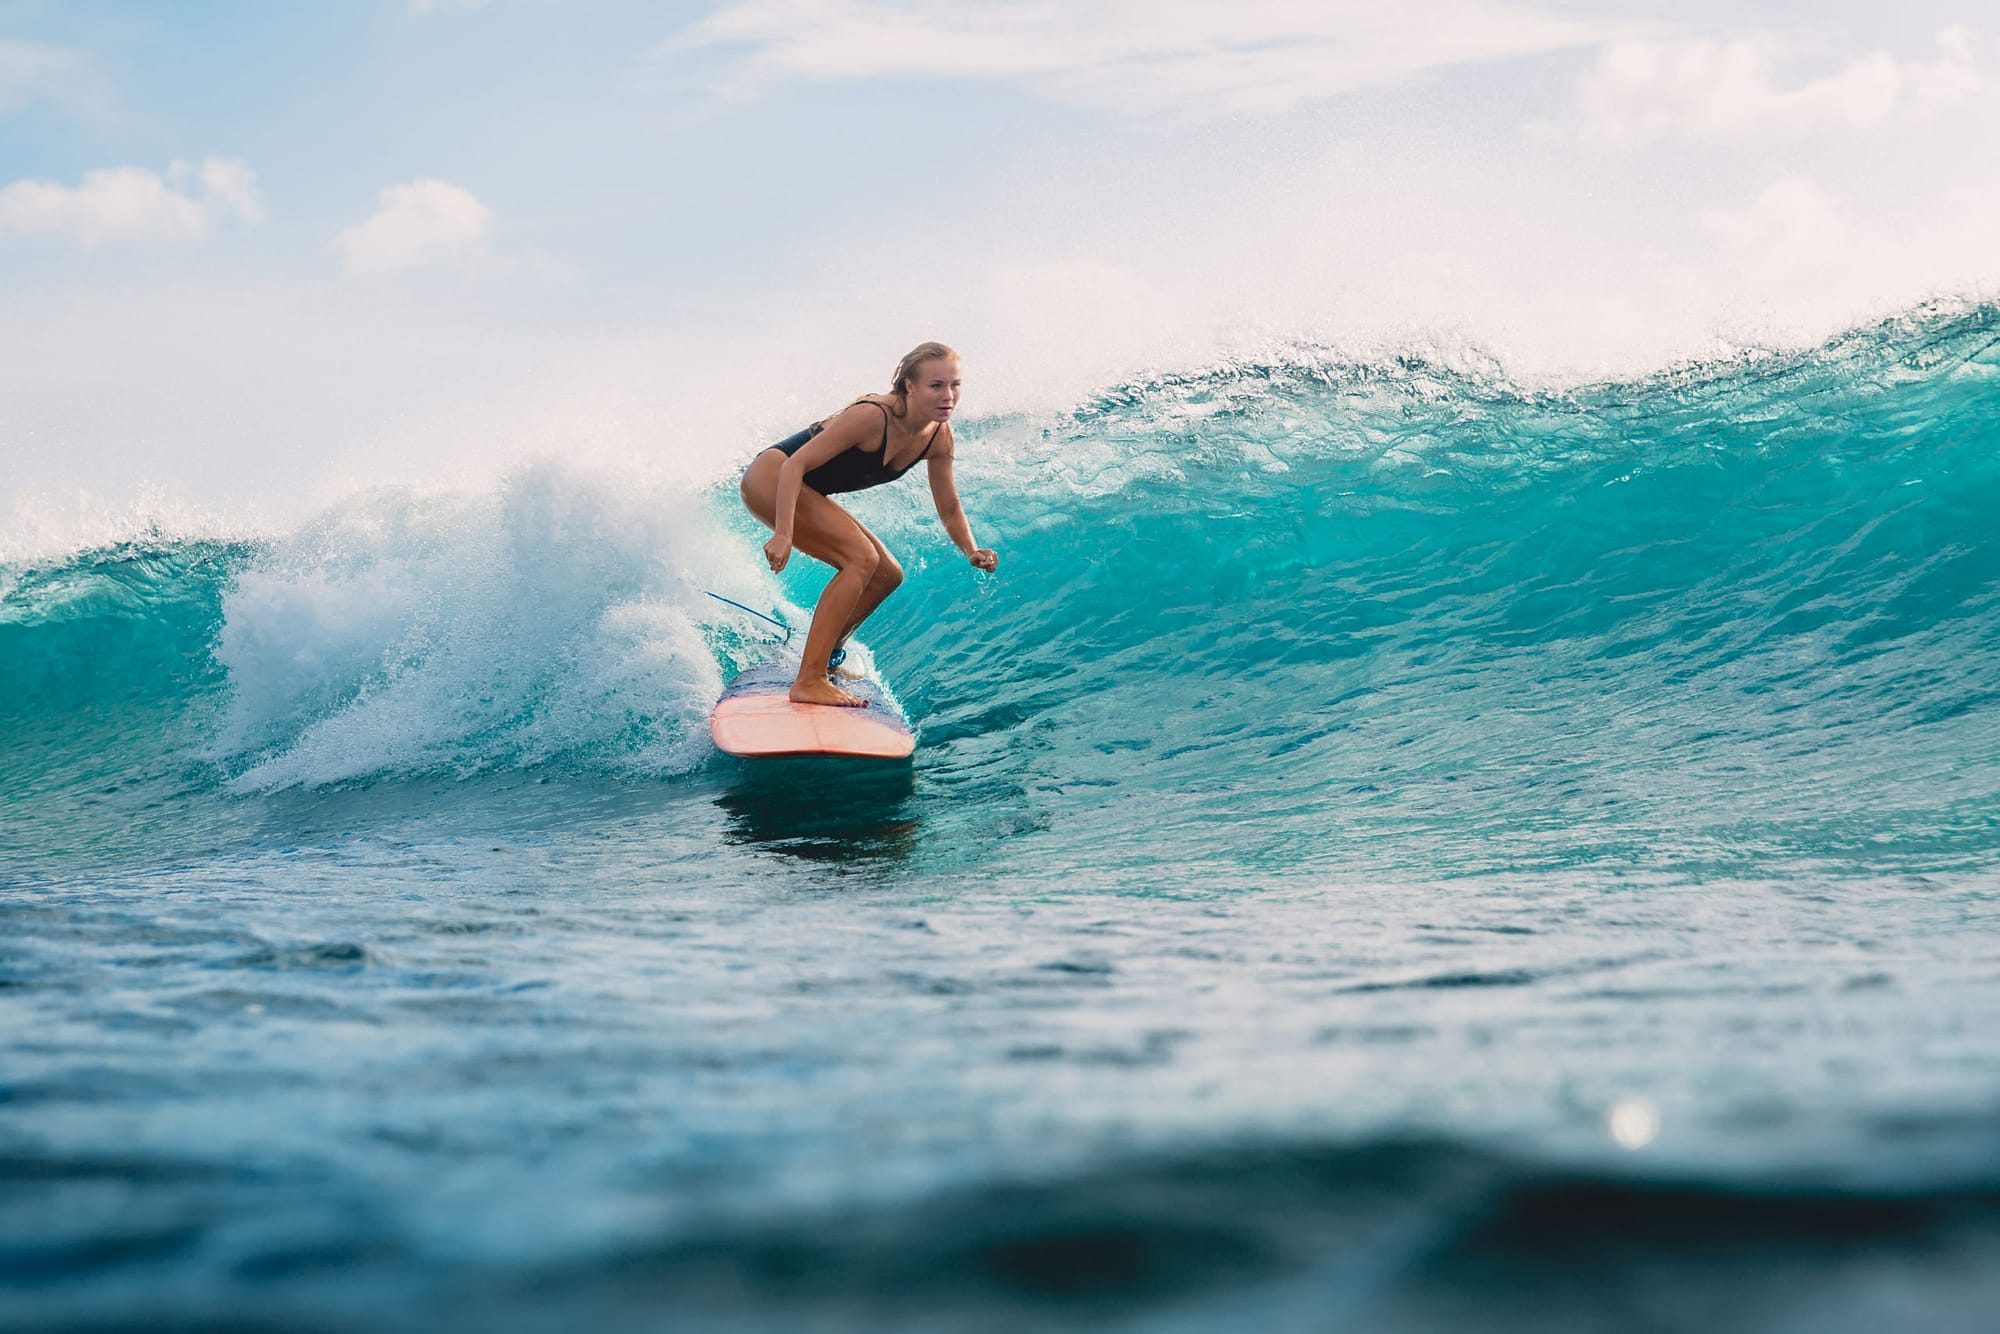 Beautiful surfer girl on surfboard. Woman in ocean during surfing. Surfer and wave. lasik icl